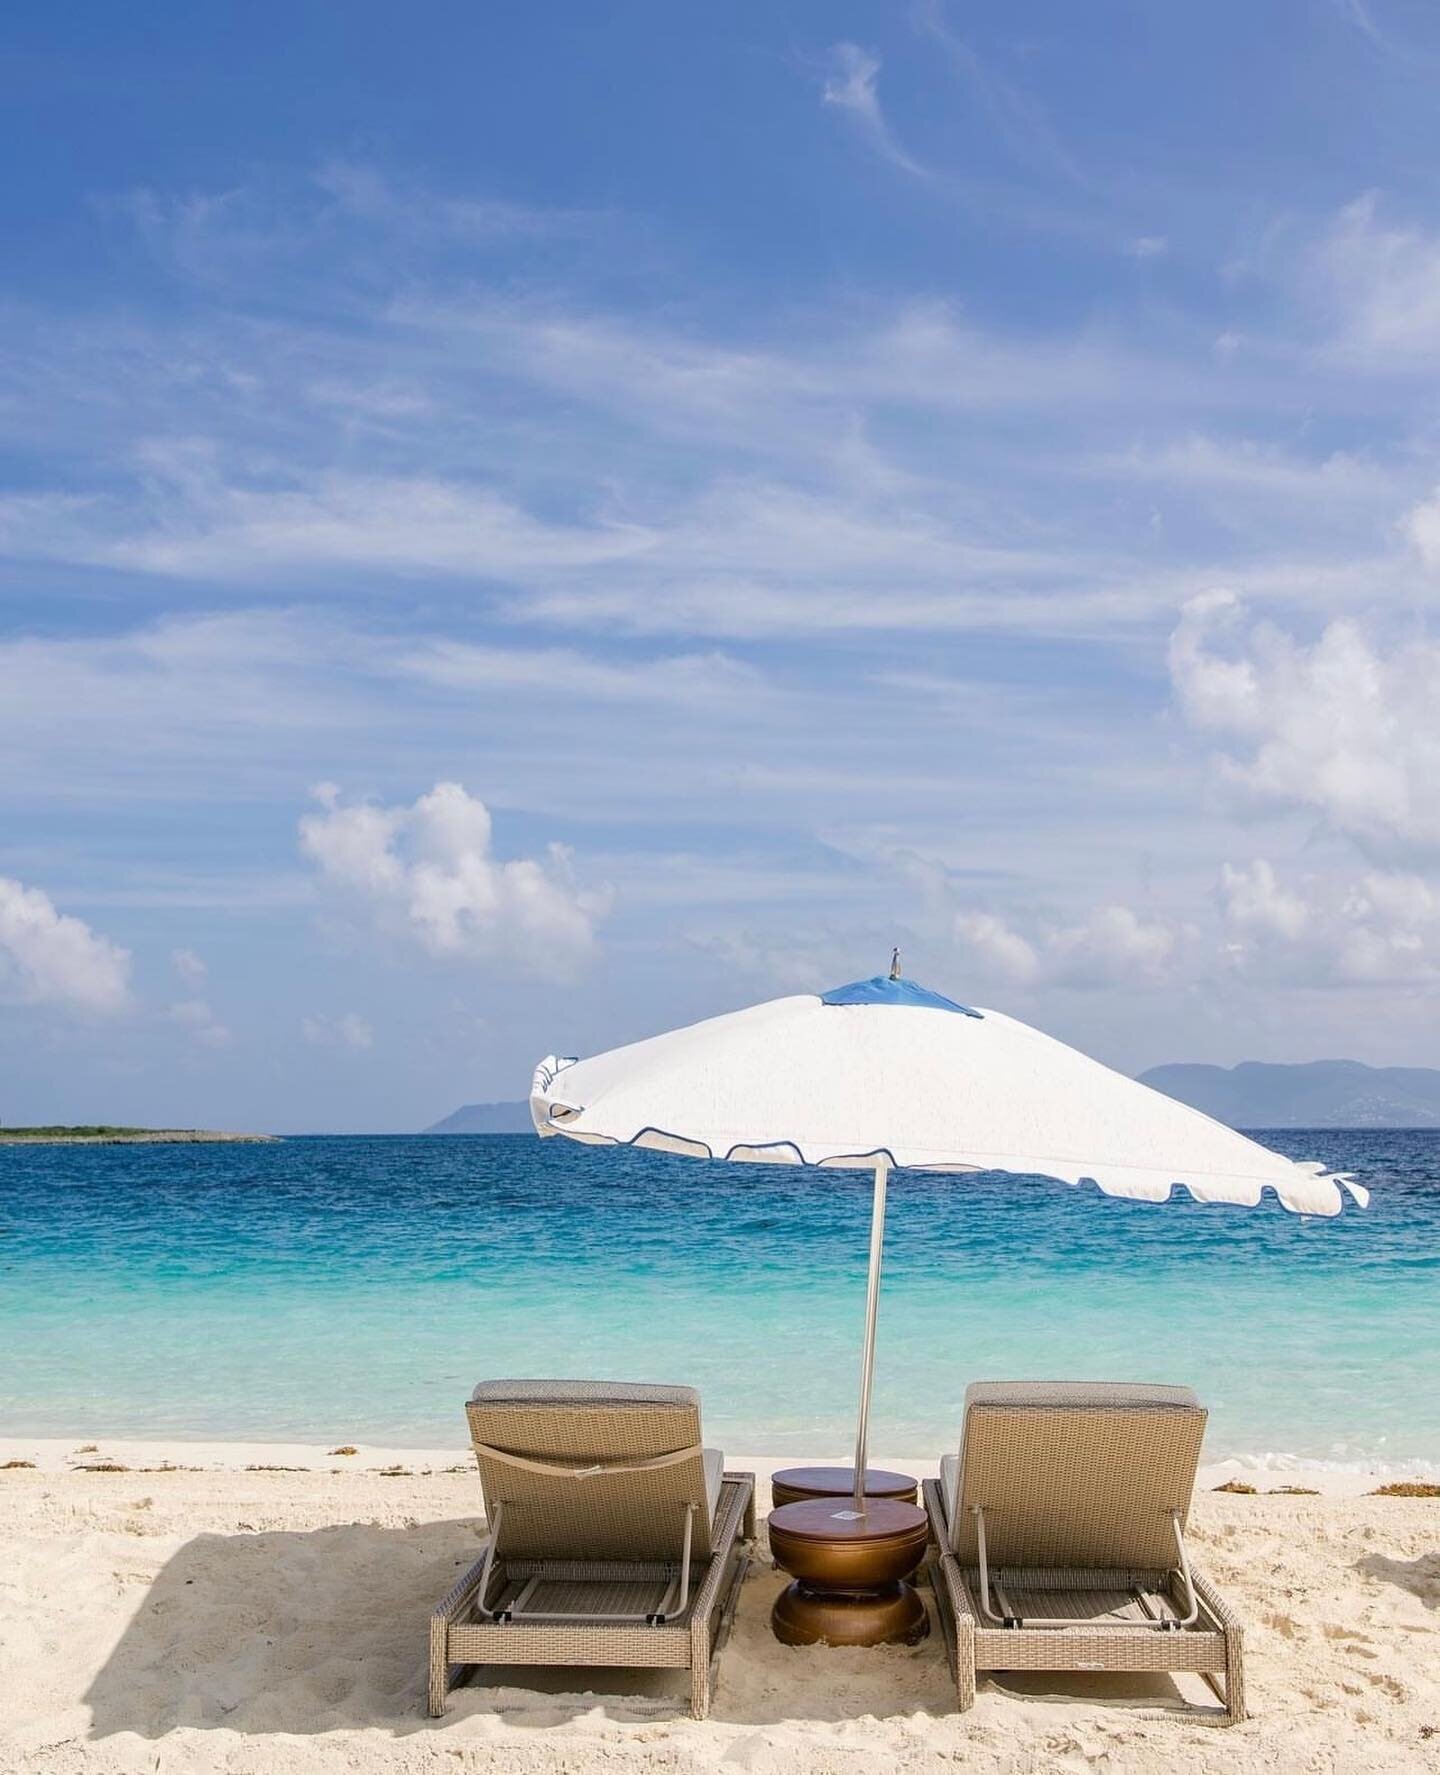 Our honeymoon clients just touched down in the Caribbean for a dreamy combo stay at @belmondcapjuluca on Anguilla and @chevalblancstbarth on St. Barths. We arranged a boat day, lunches and dinners at all the best spots, massages, a few other fun expe